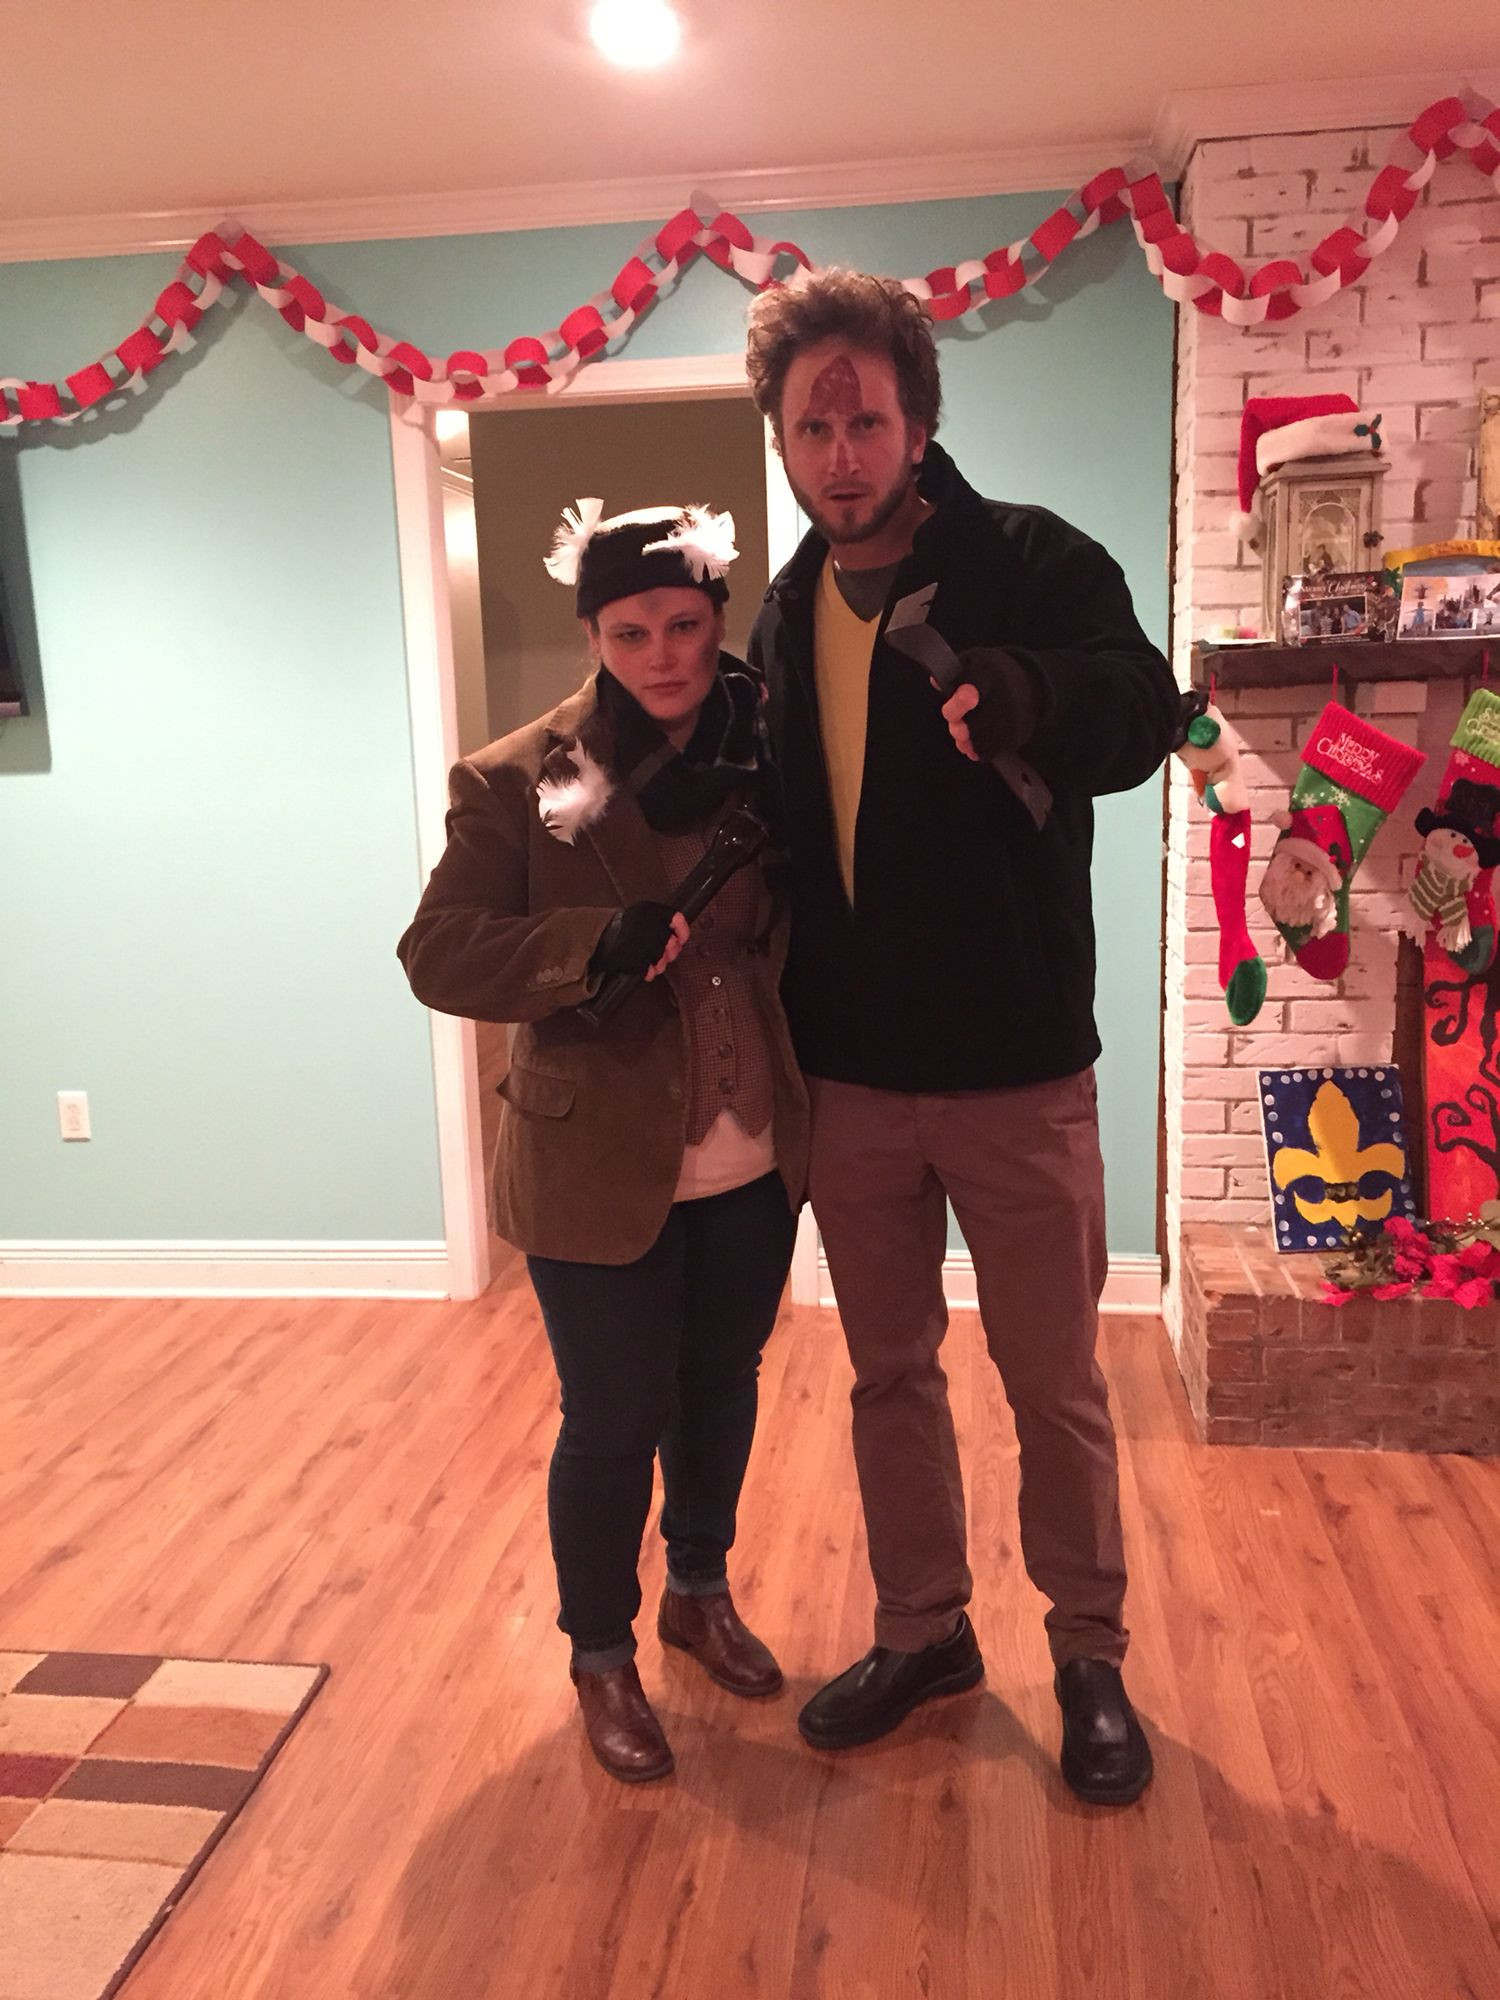 Christmas Party Costume Theme Ideas
 Adult Couple Costume Party Christmas Movie Theme "Harry